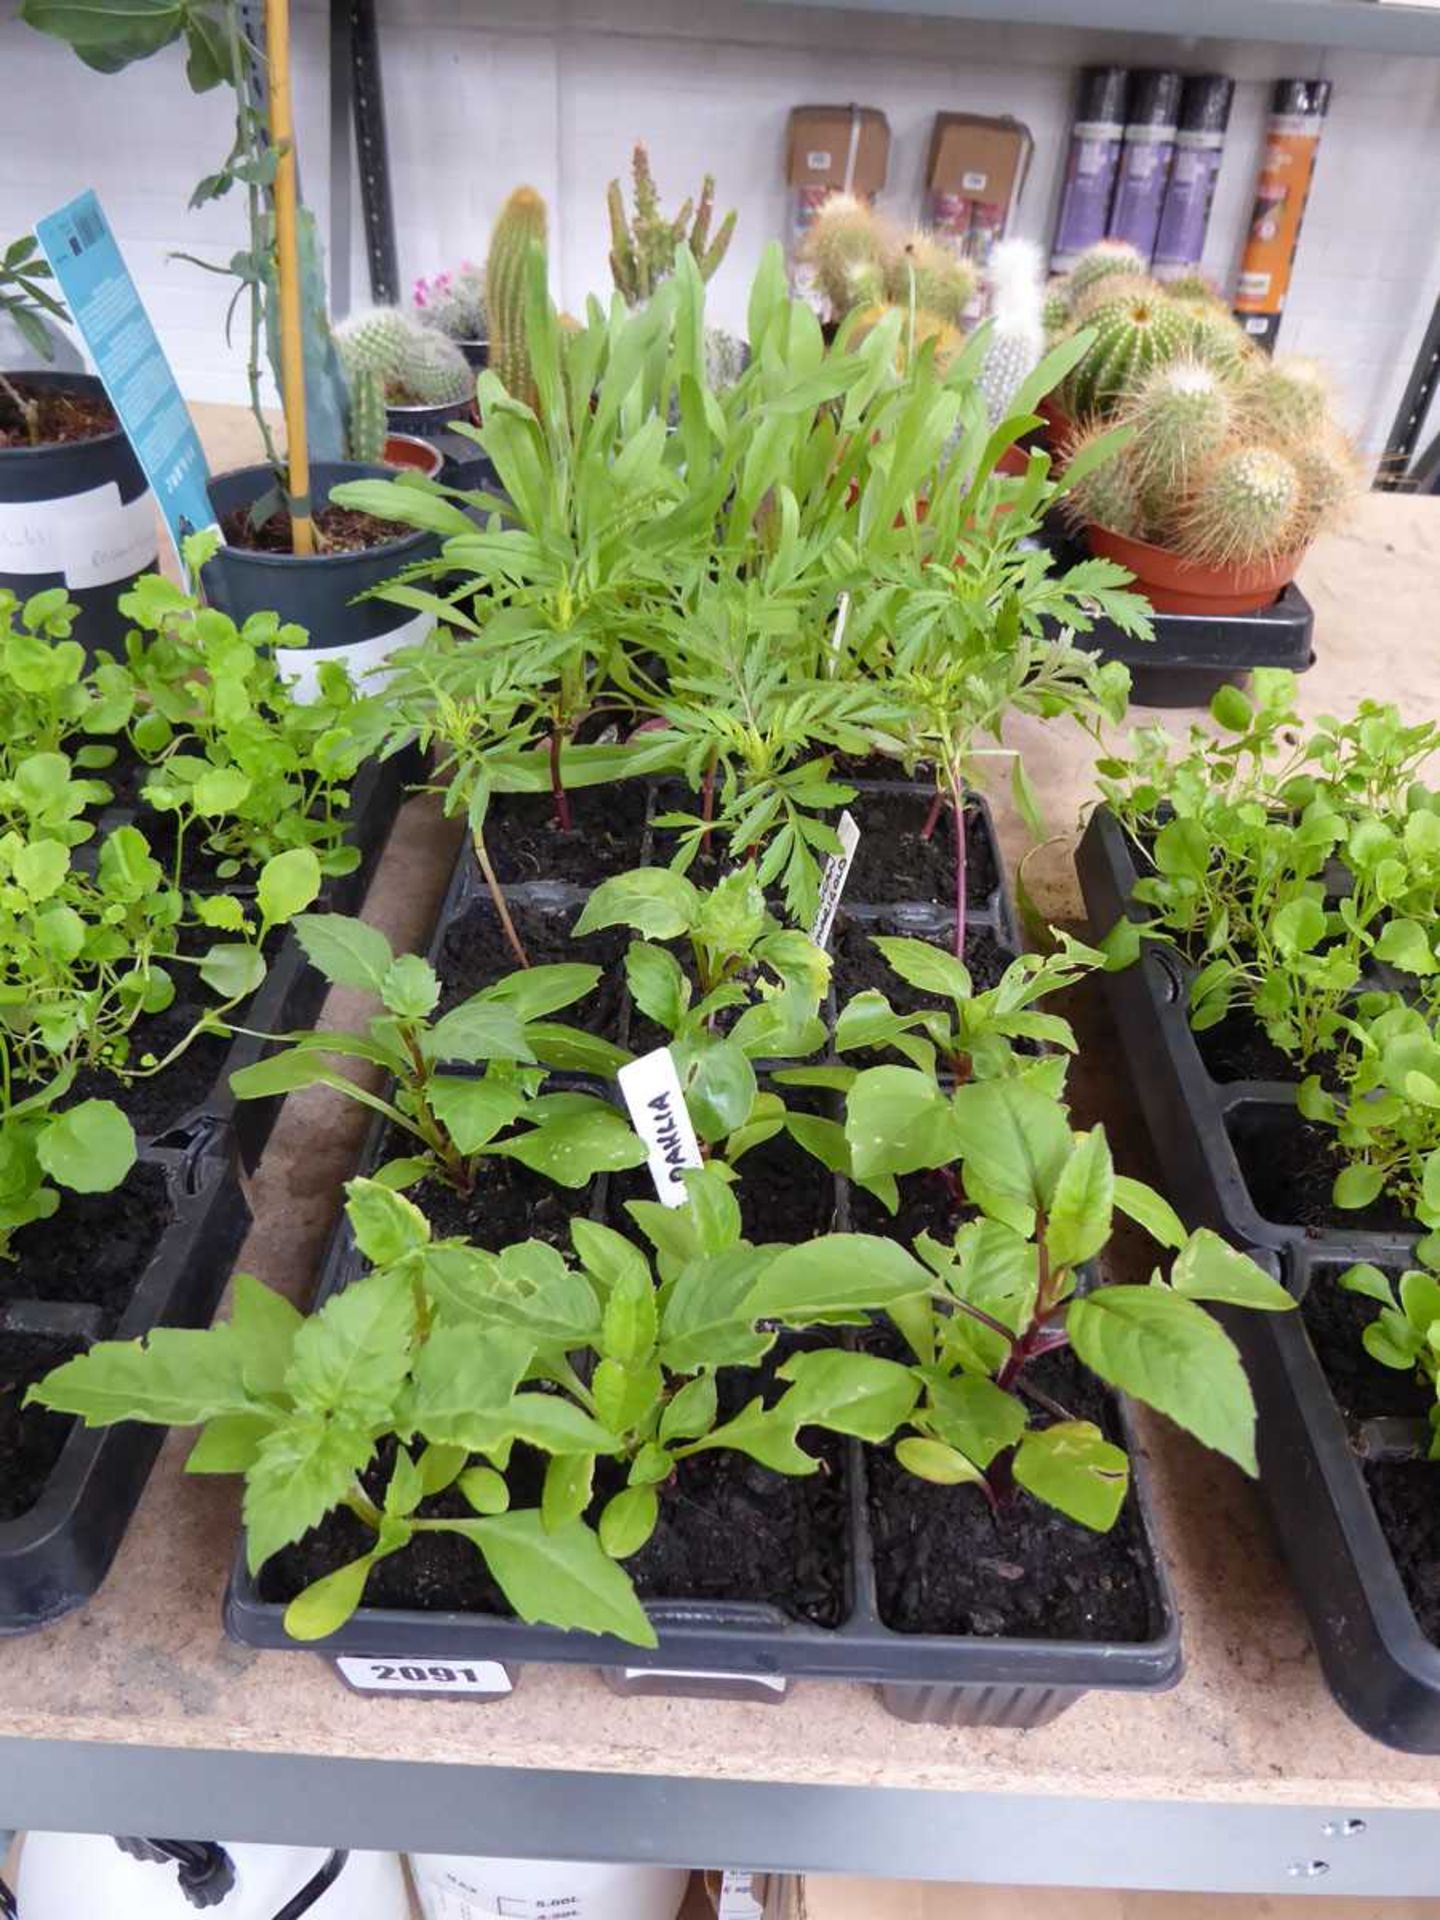 3 trays of mixed perennial plants incl. dahlias, African marigolds and corn flower